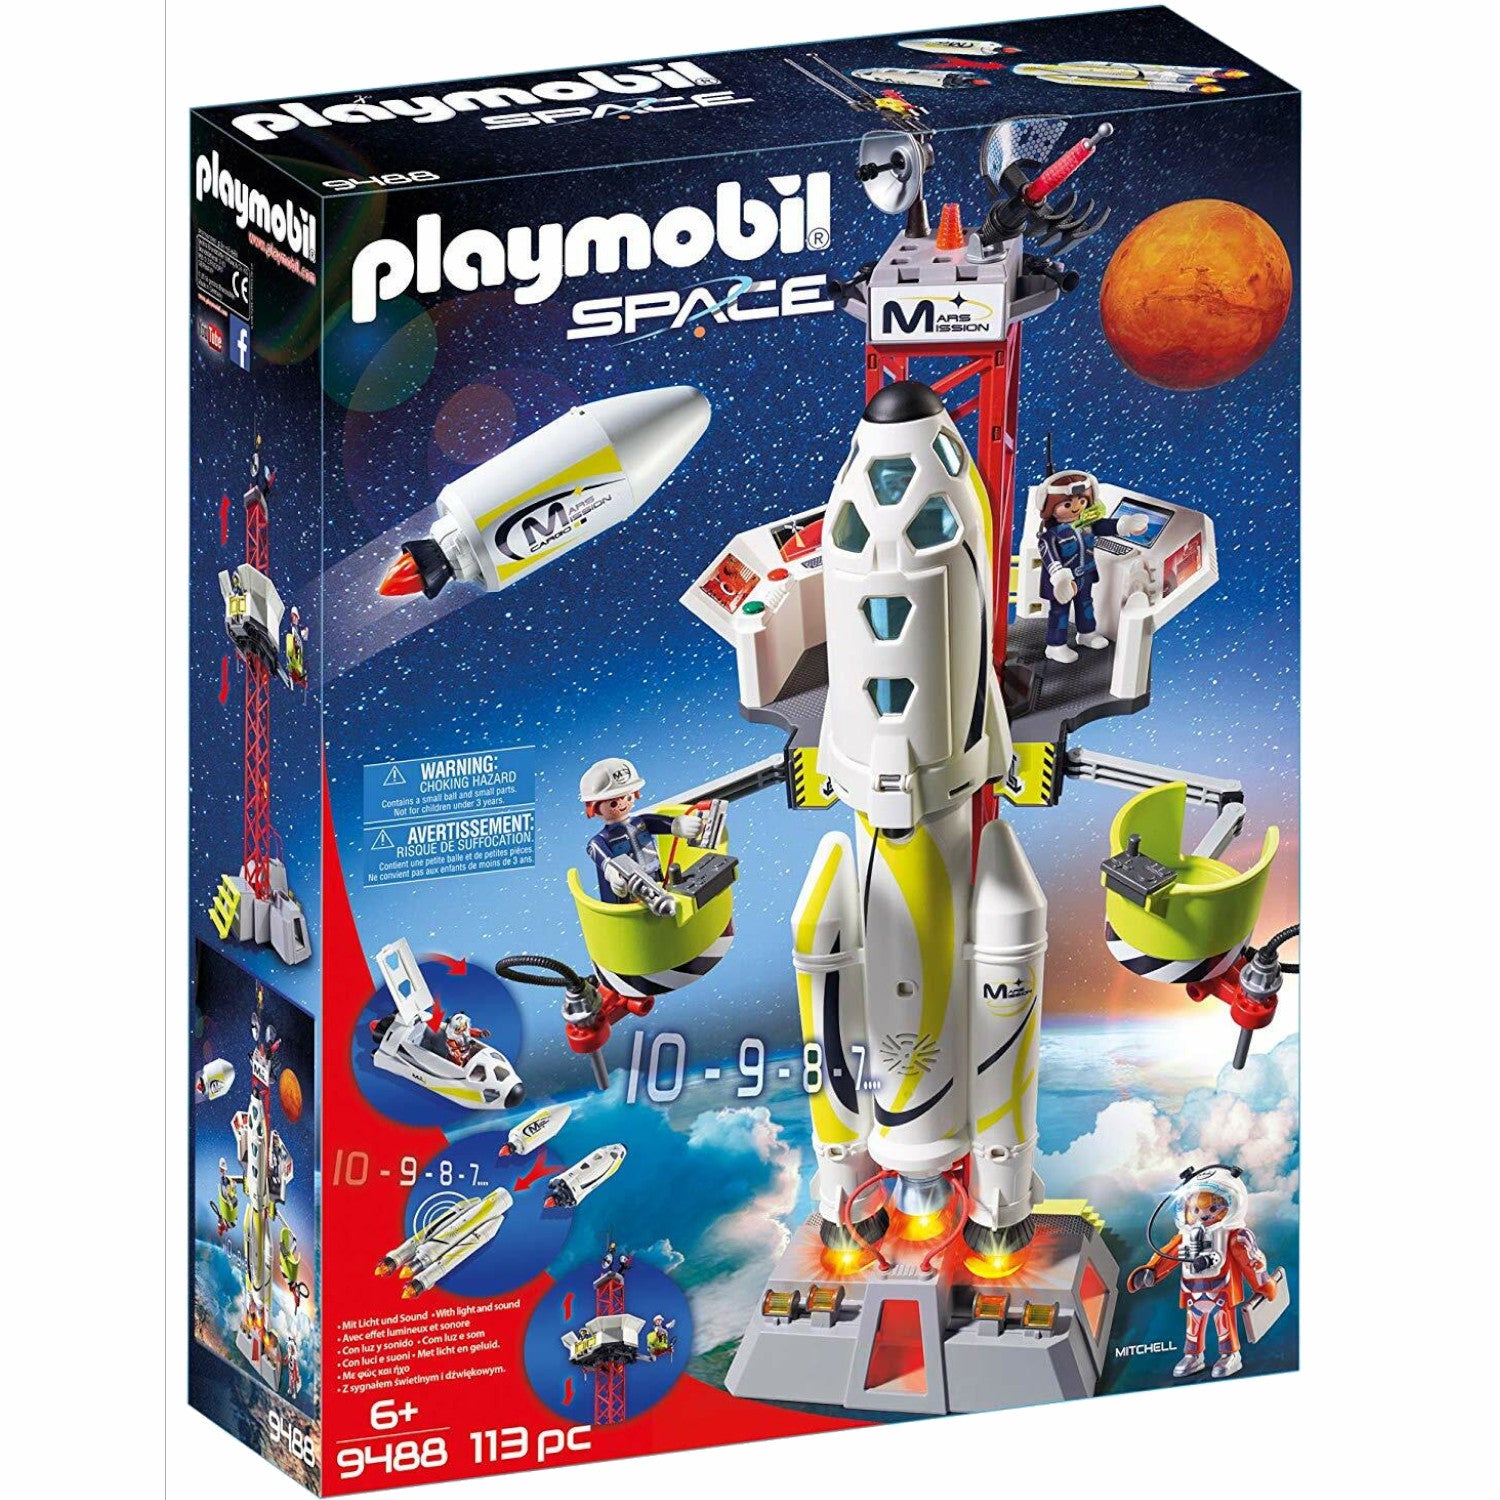 Playmobil Mission Rocket with Launch Site